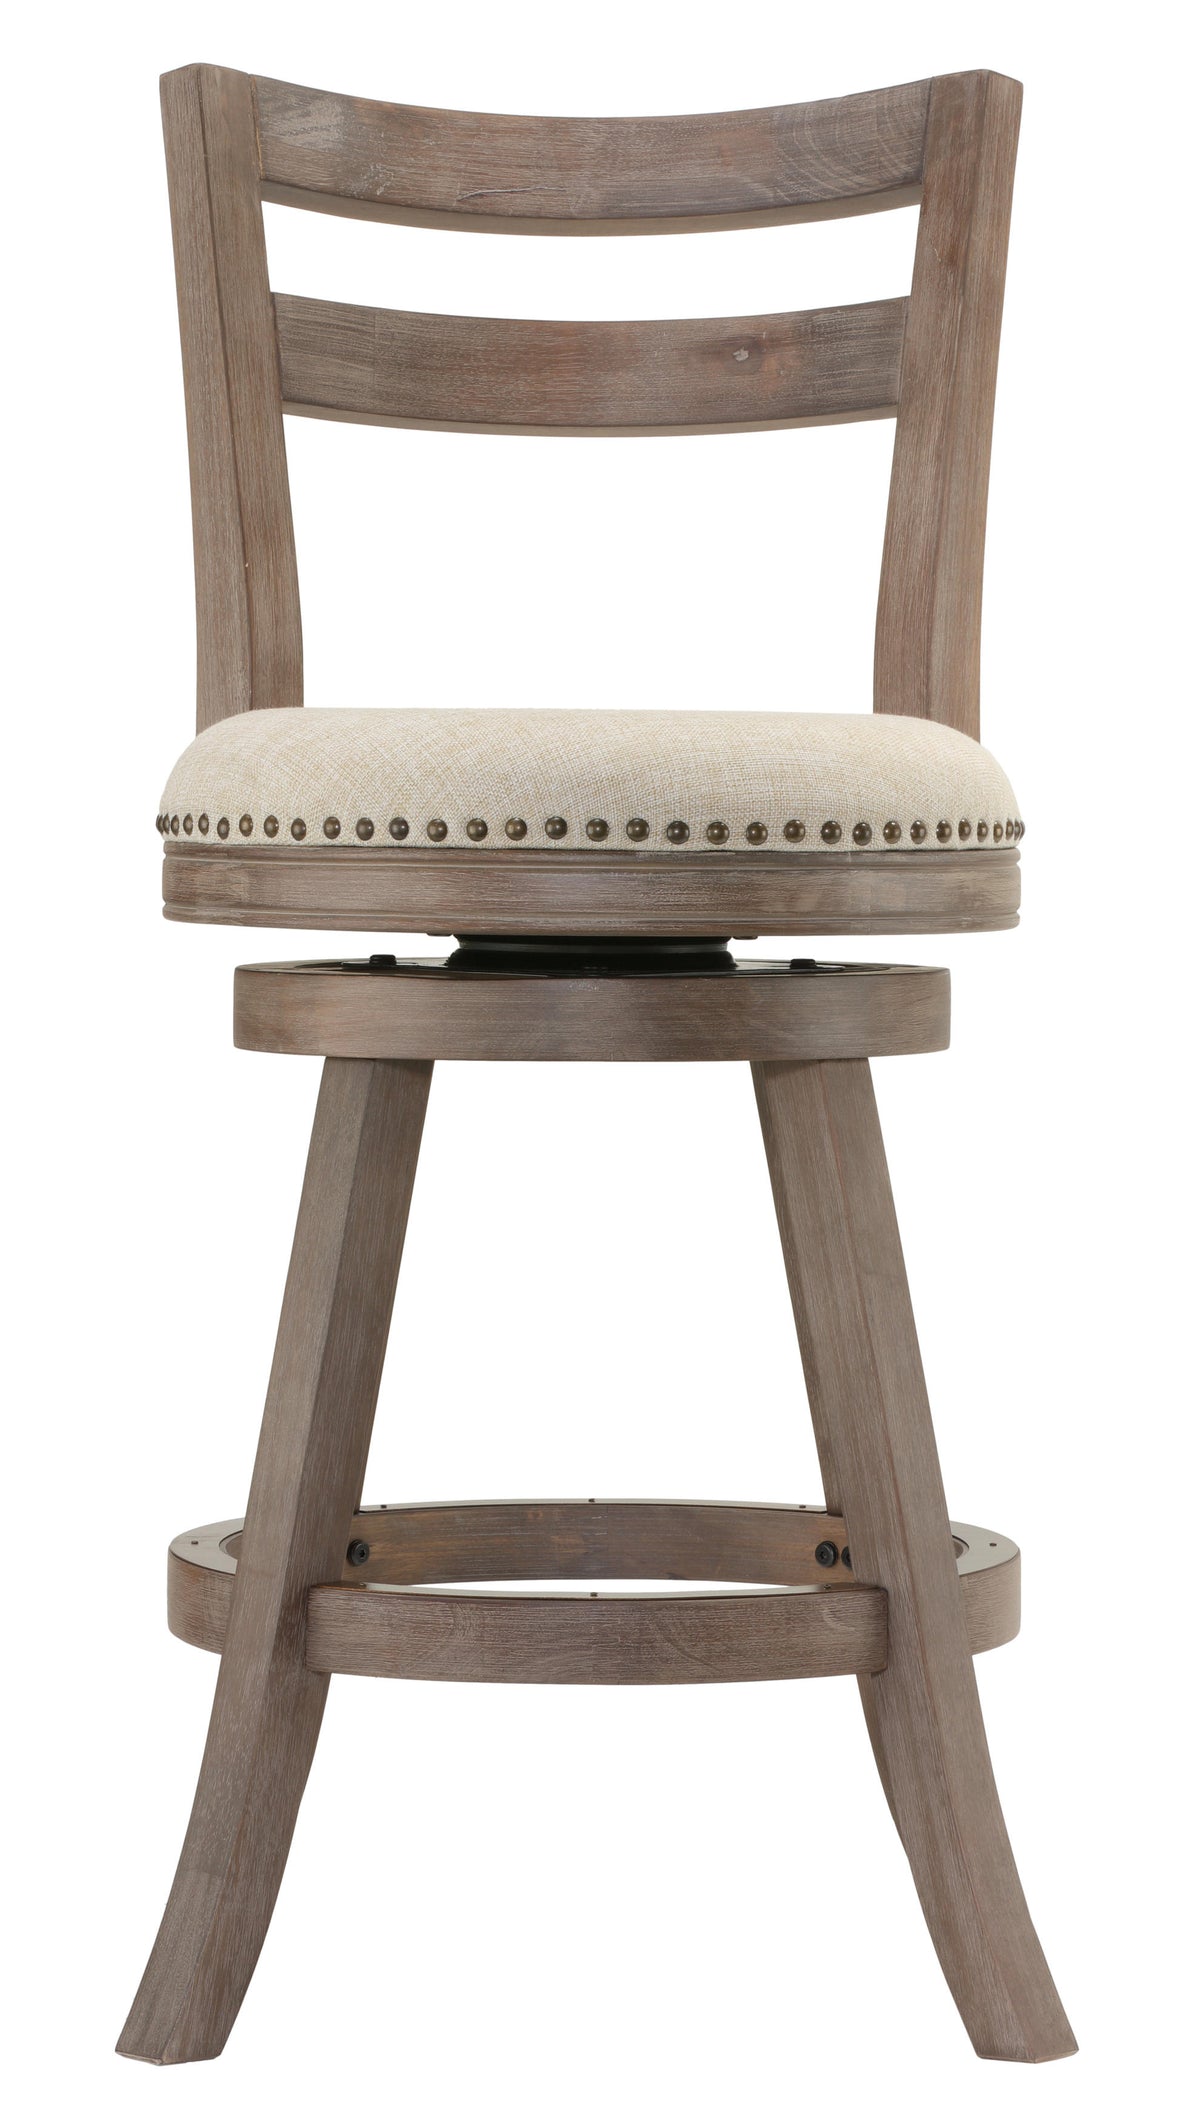 Cortesi Home Harper Counter Stool Swivel Bar Stool with Back in Solid Wood, Beige Fabric